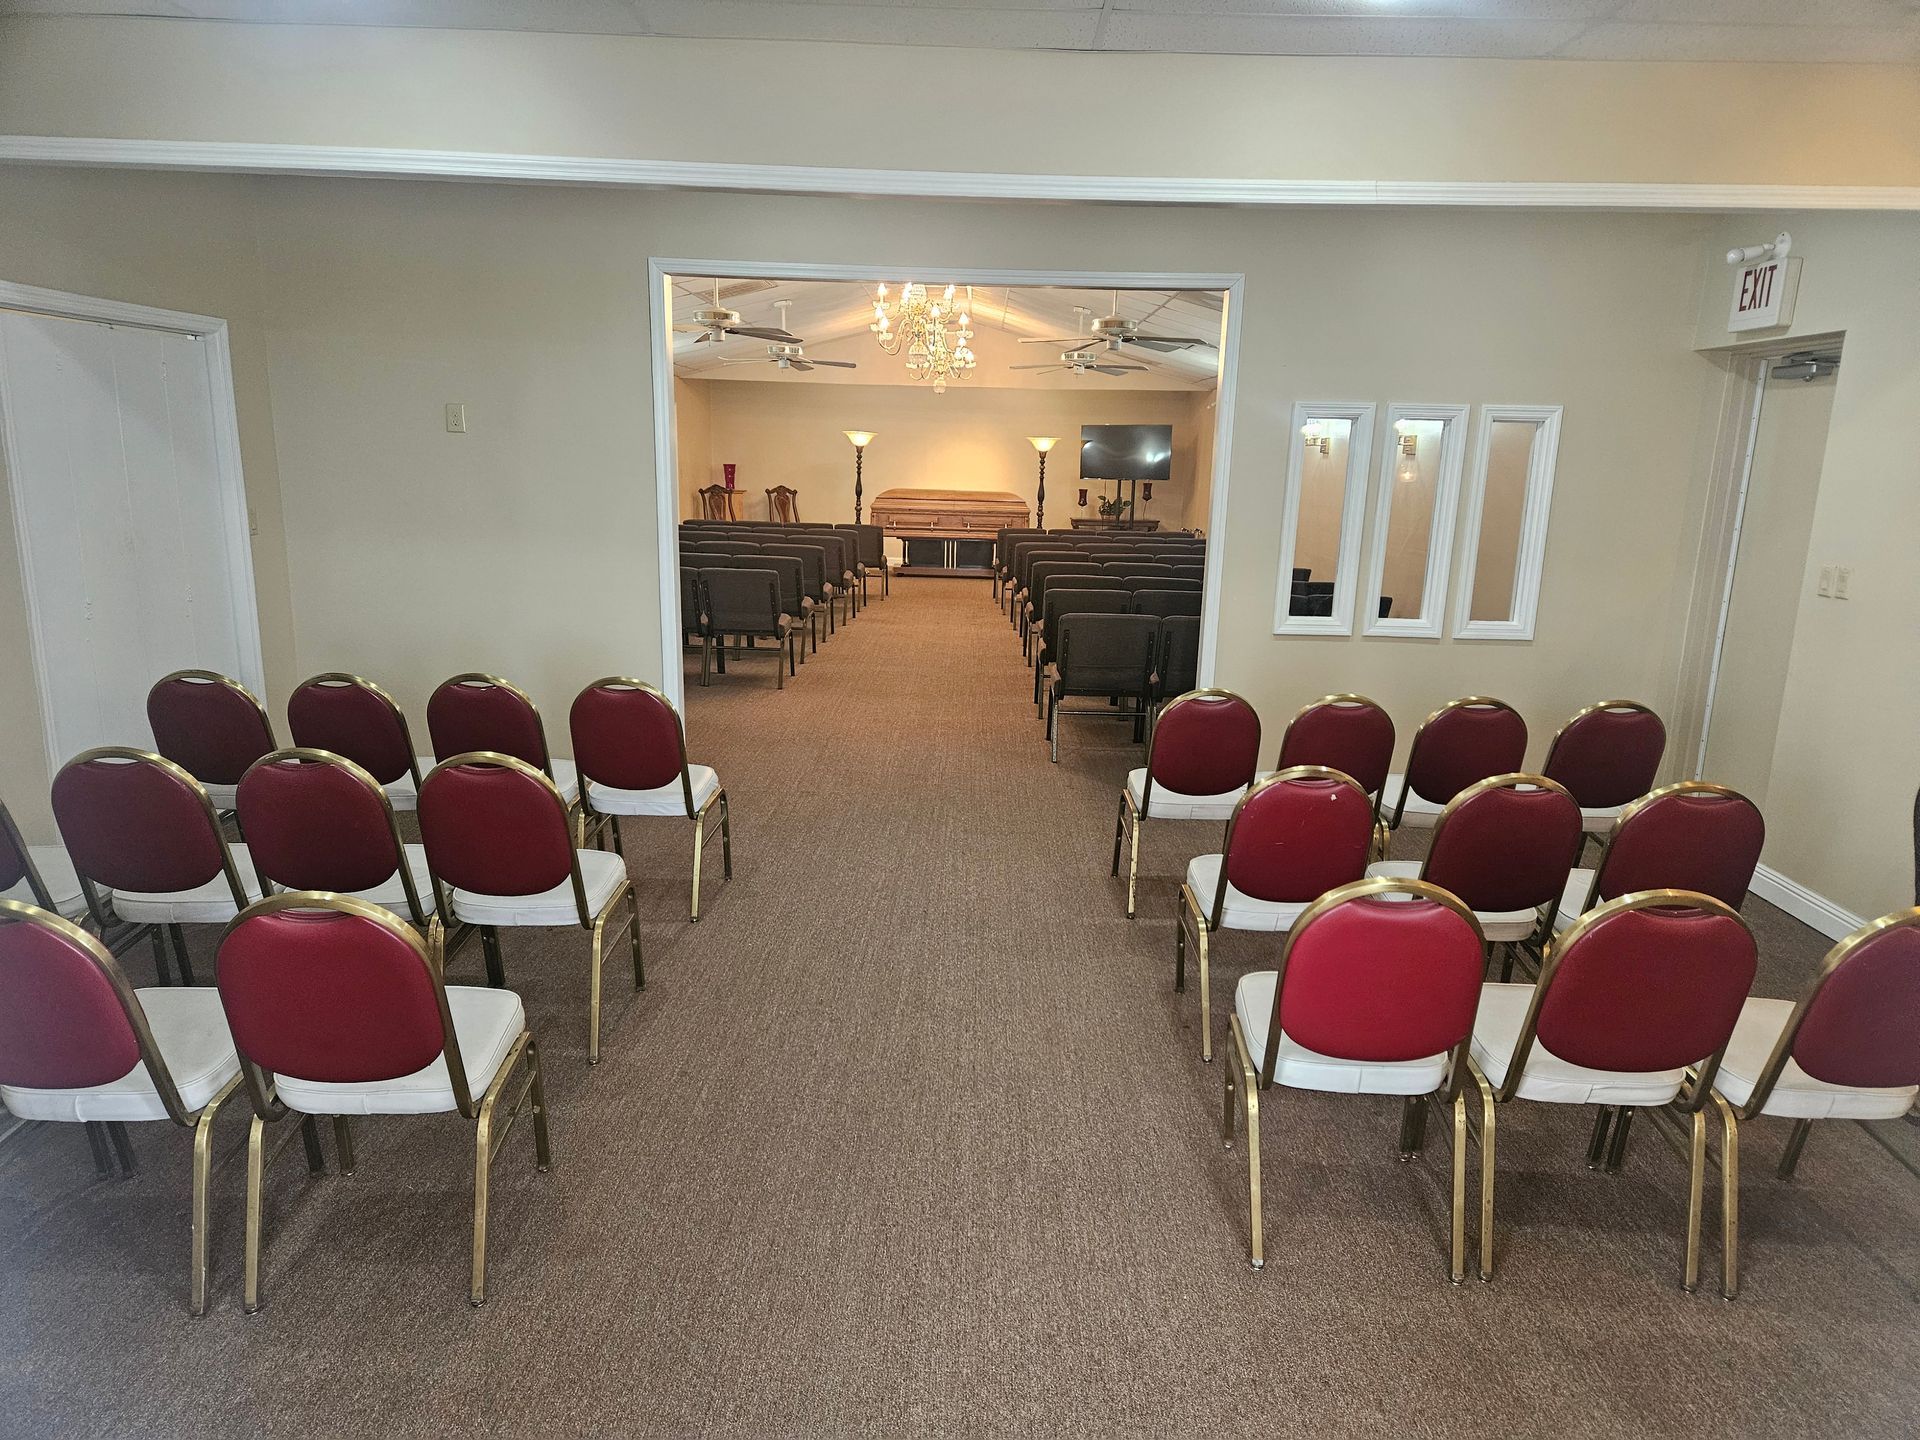 Chapel with red seats